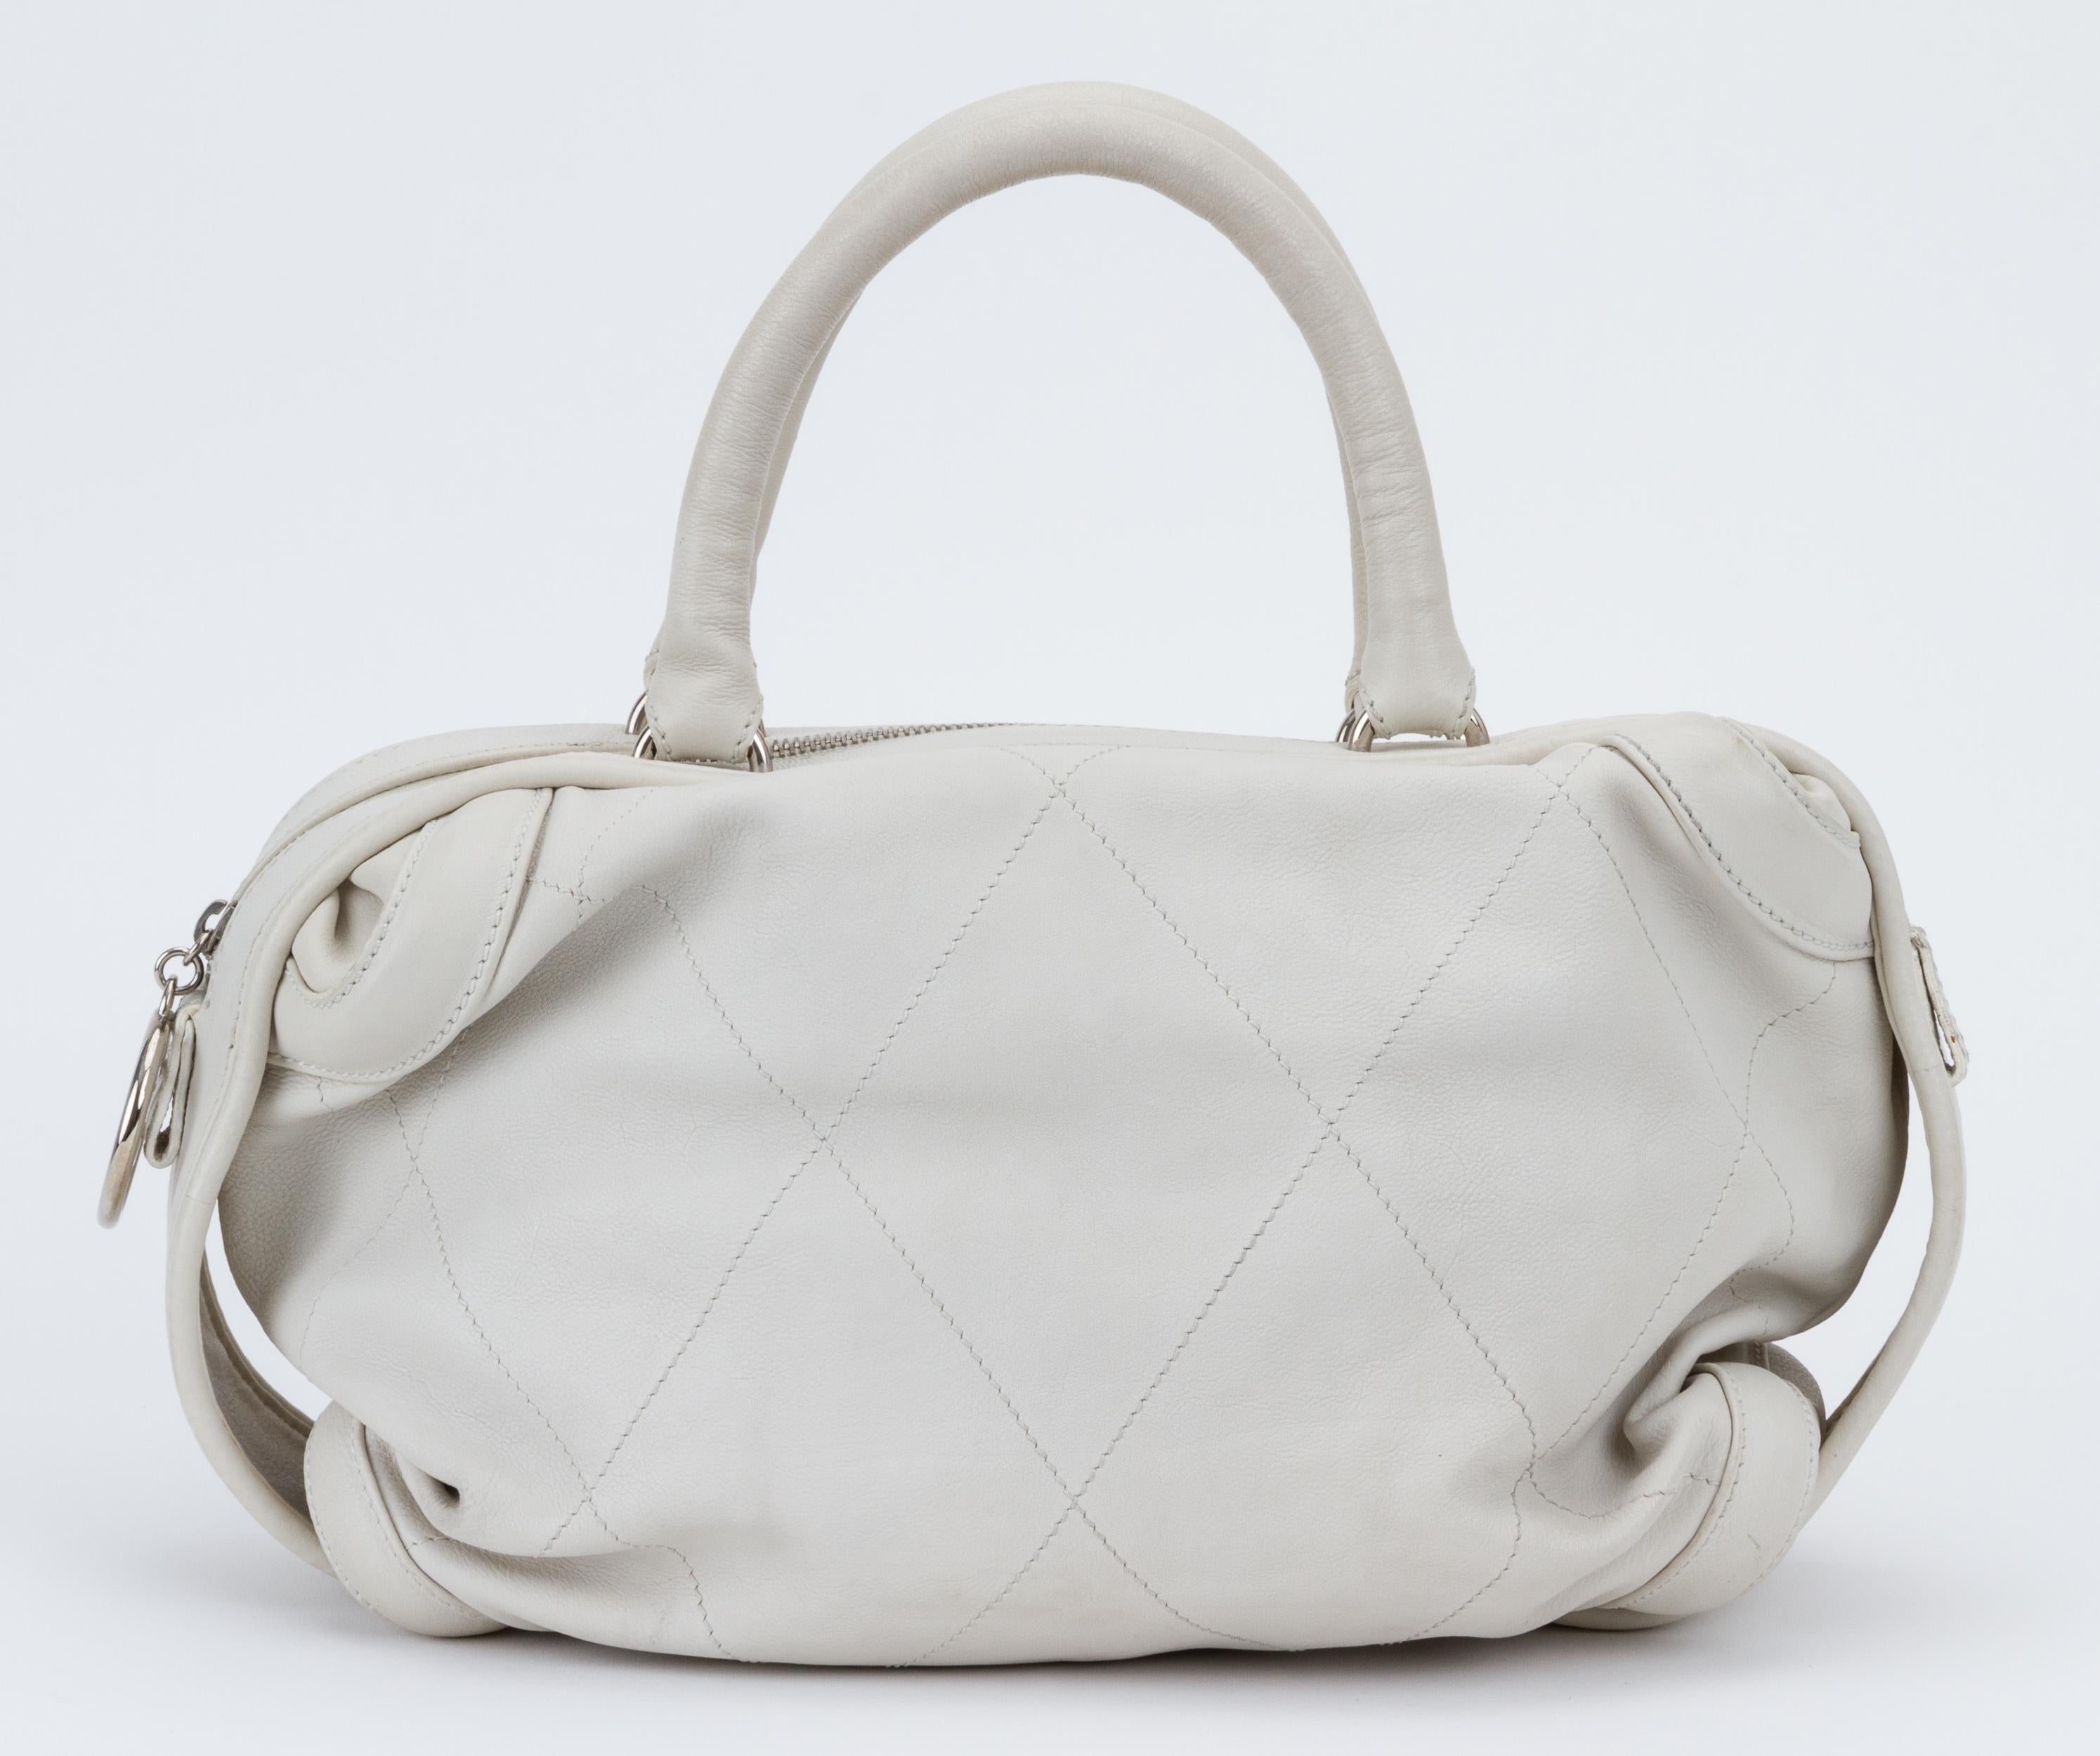 Chanel ice white bowler bag , resistant leather and silver tone hardware. Handle drop 6